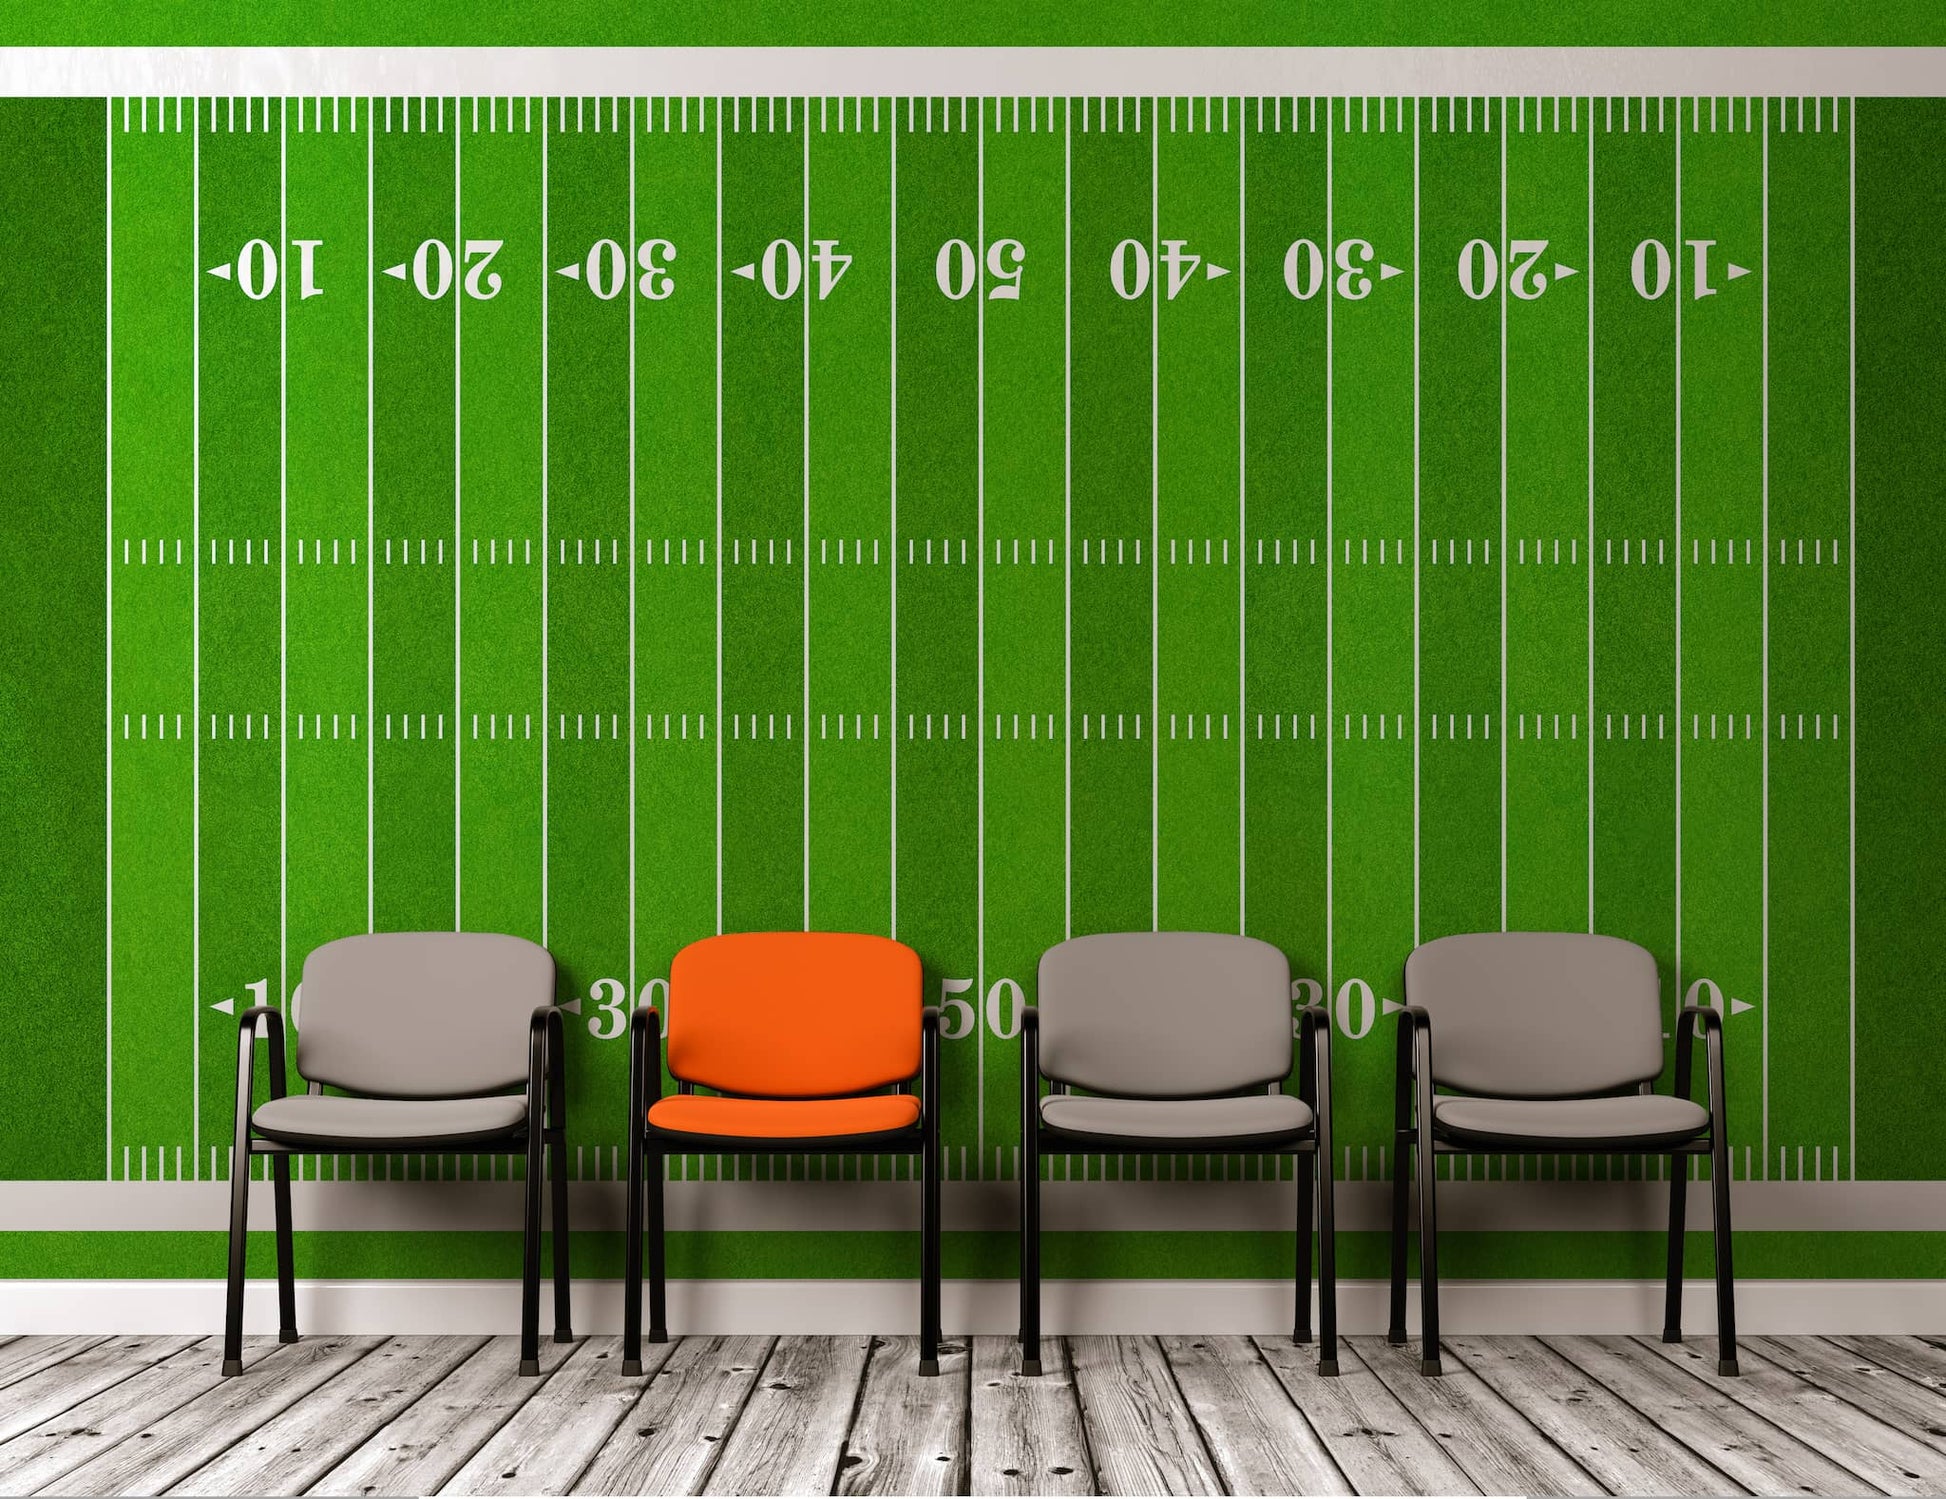 Football_Field_Decal_Design_on_wall